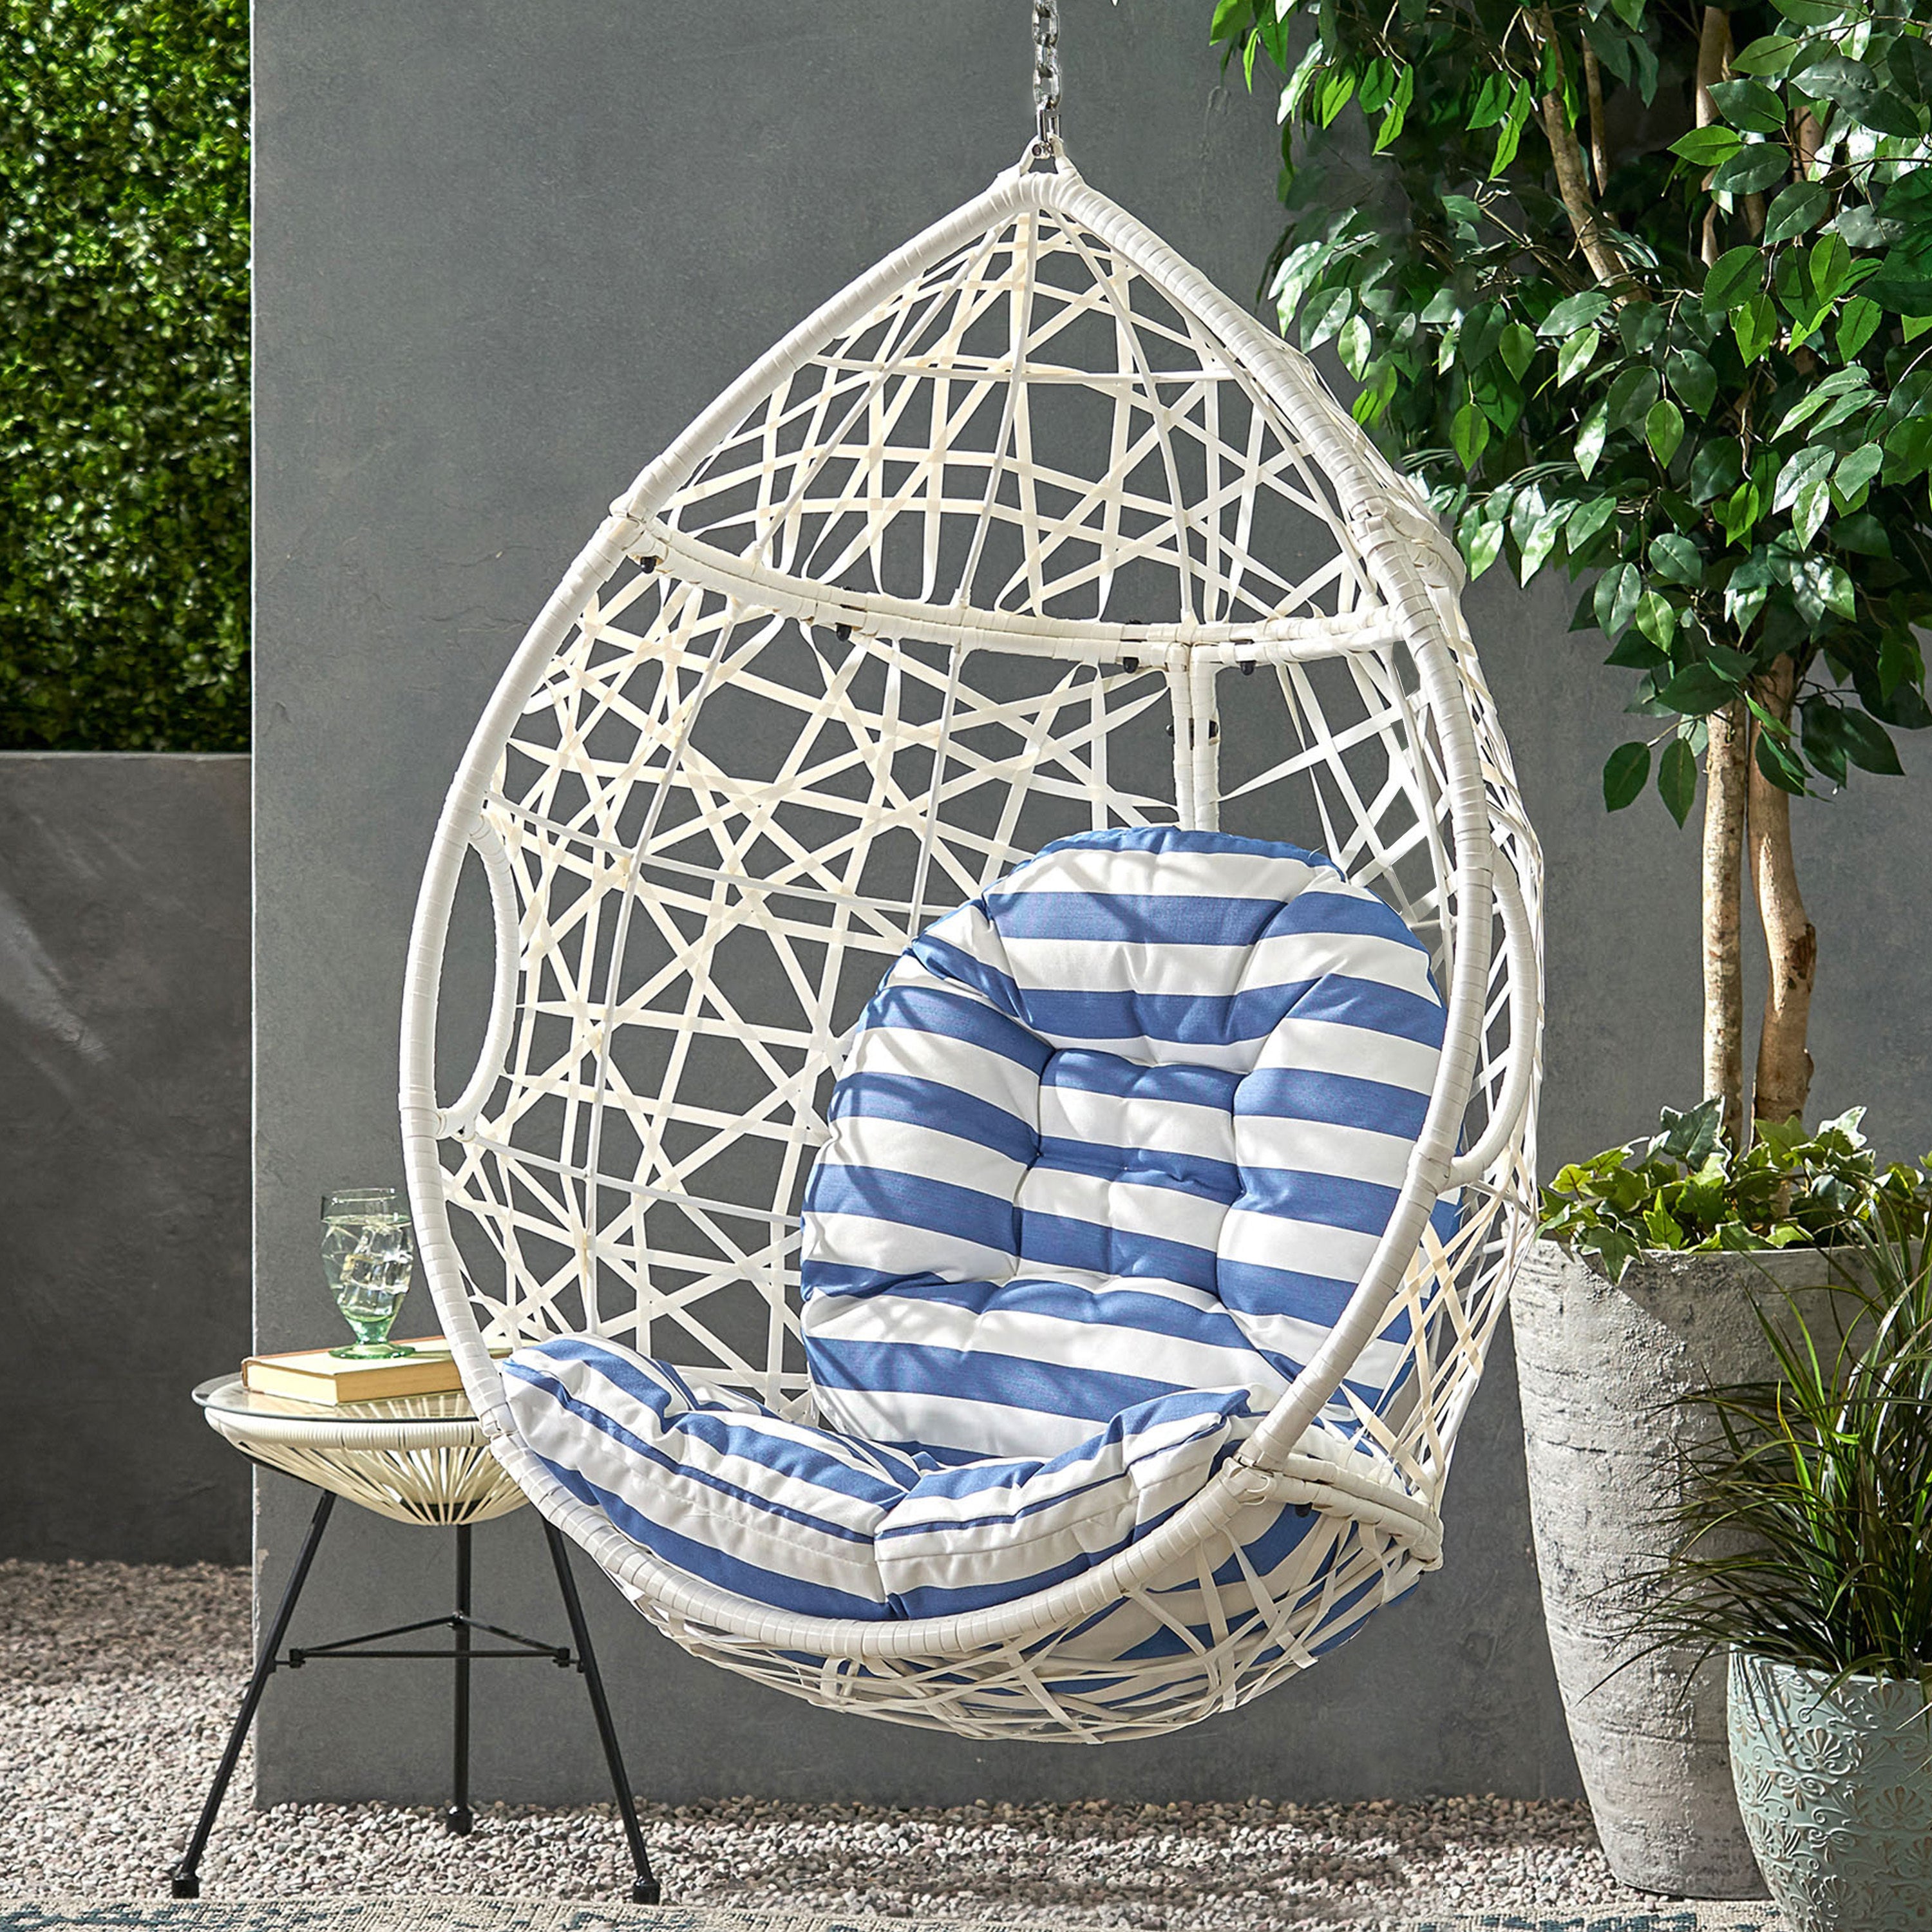 TM-HOME--HANGING-EGG-CHAIR-Furniture-|-Outdoor-Furniture-|-Outdoor-Seating-|-Outdoor-Chairs